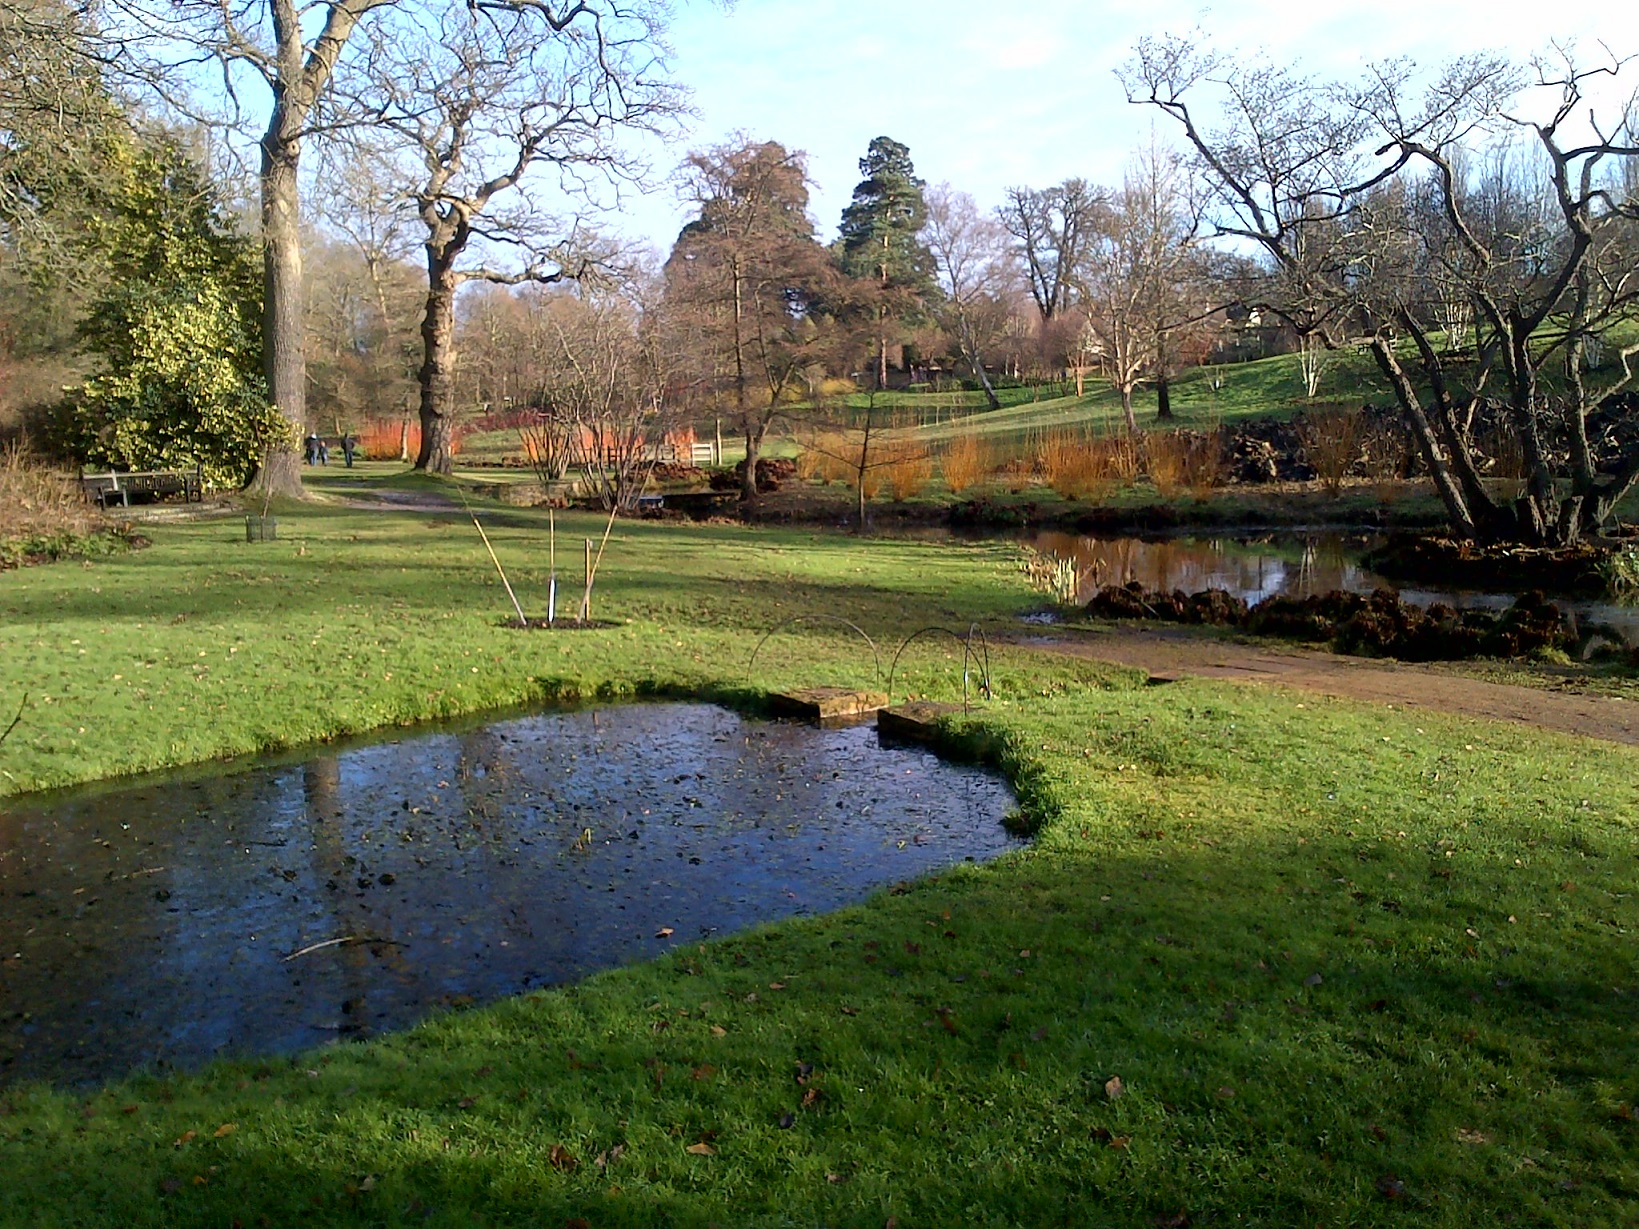 Ornate ponds and gardens in winter sunshine